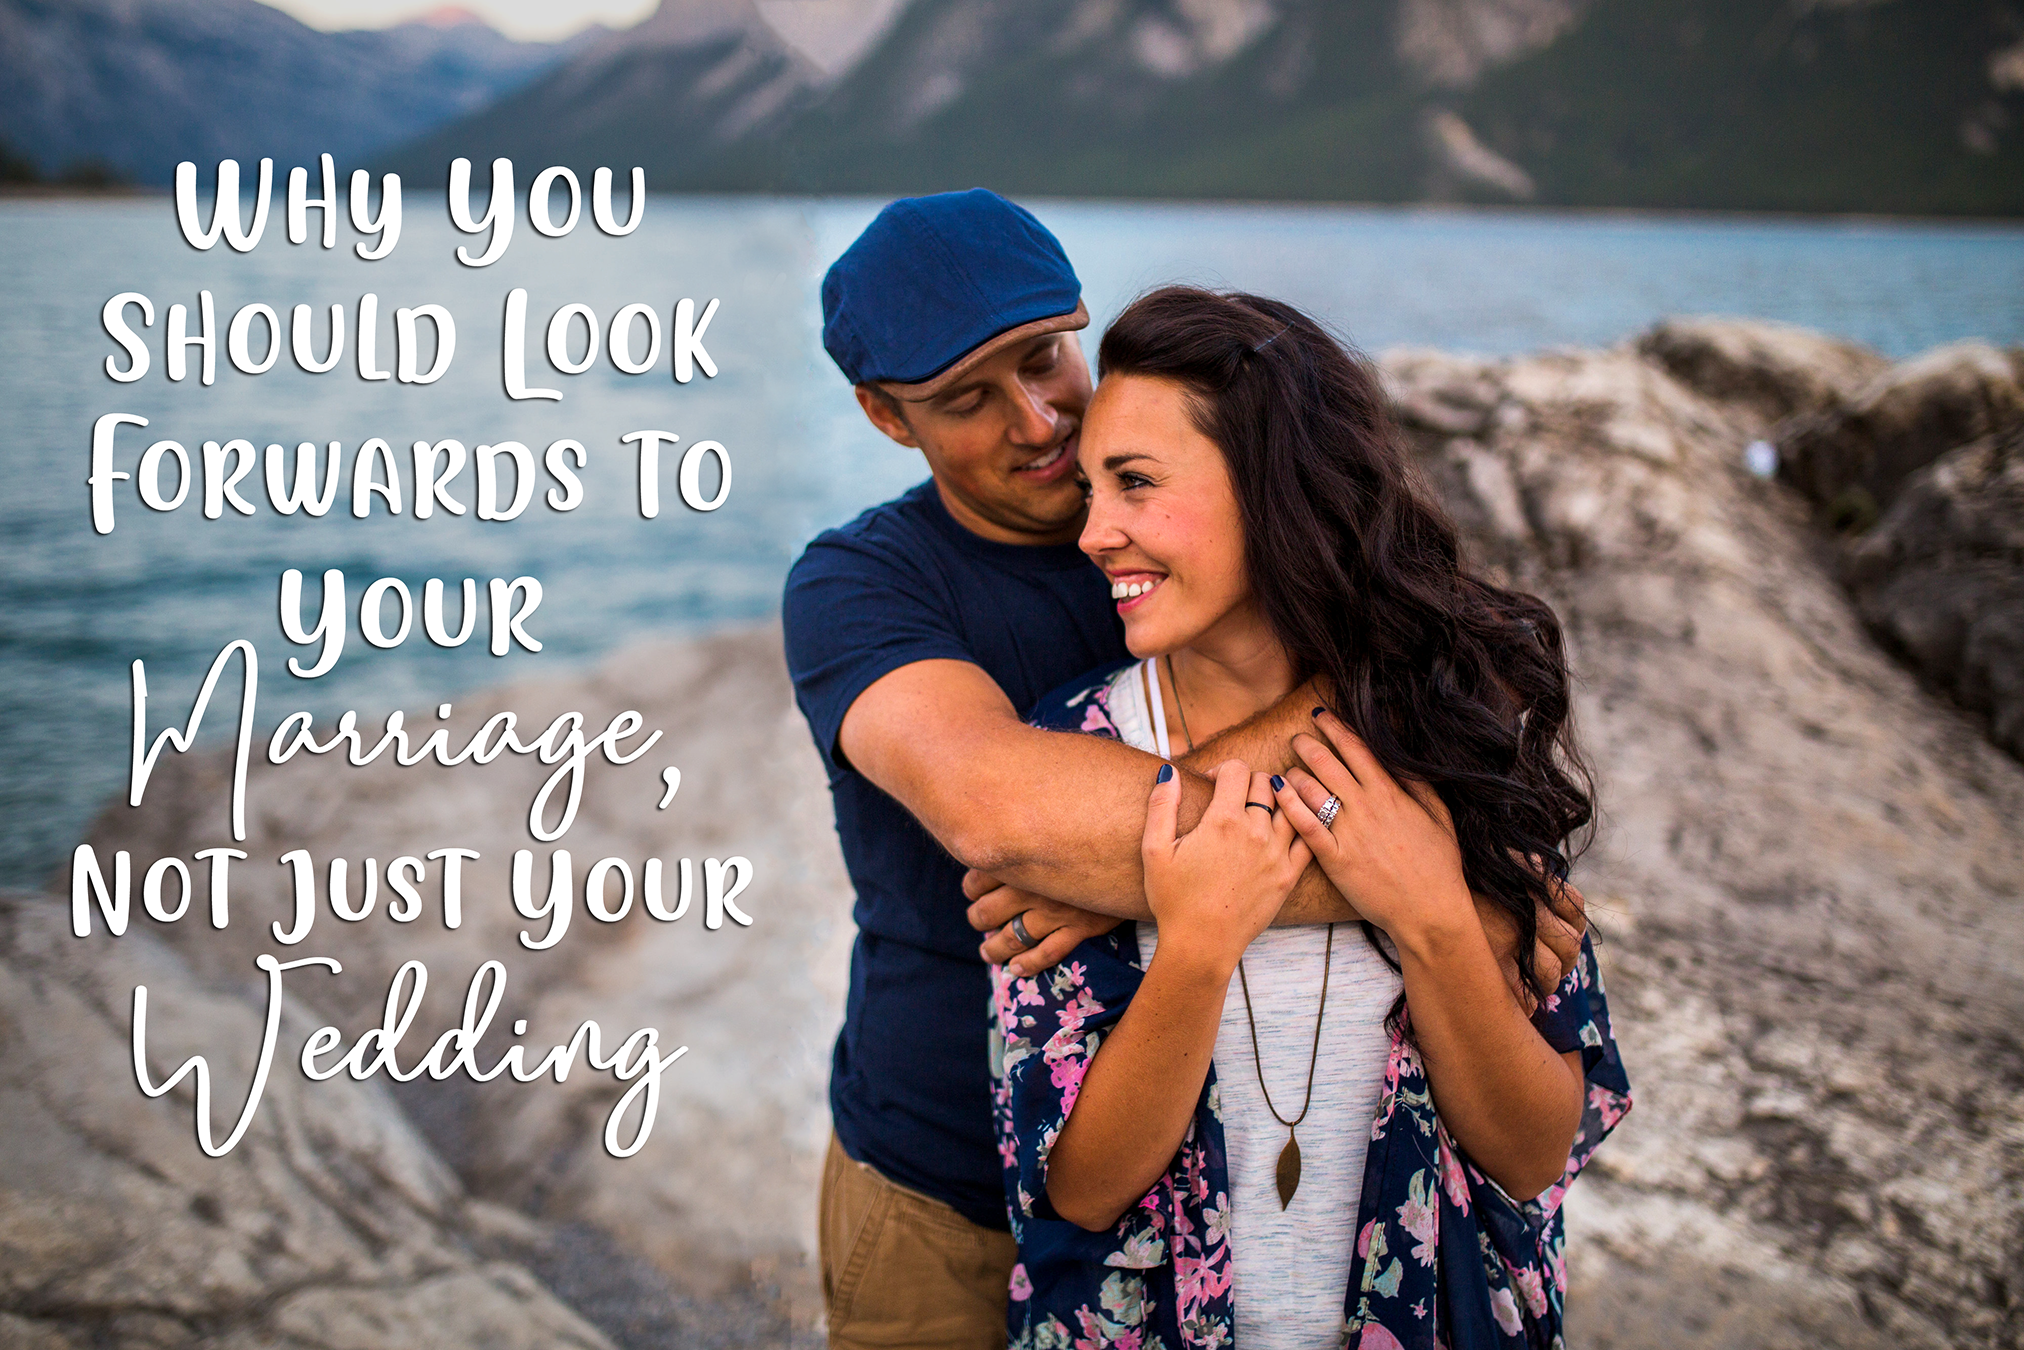 Why You Should Look Forwards to Your Marriage, Not Just Your Wedding